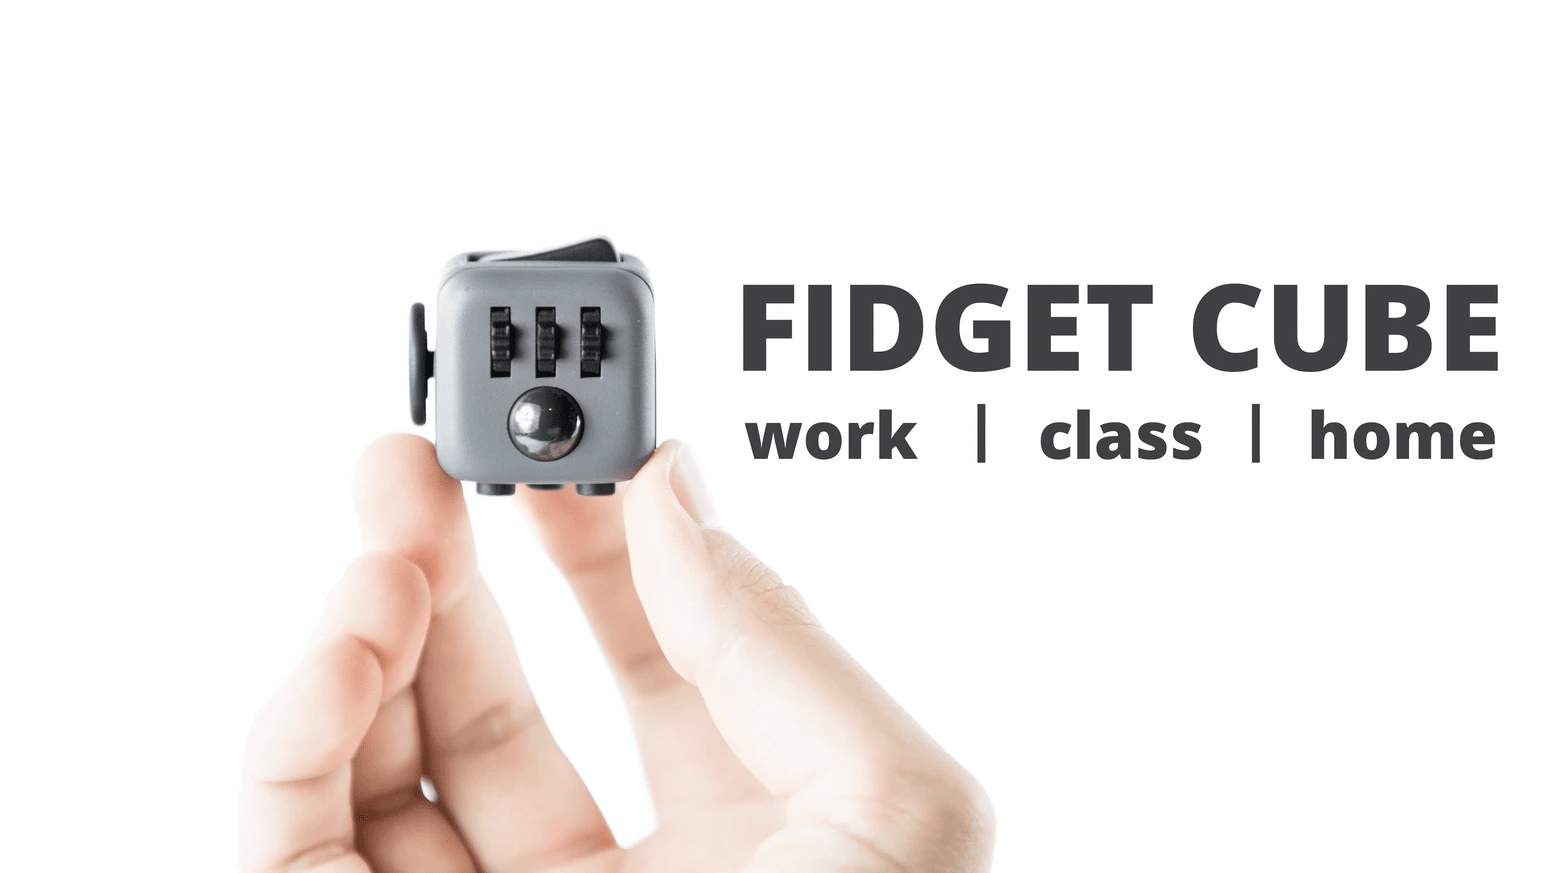 Fidget Cube is one of the most successful kickstarter campaigns.